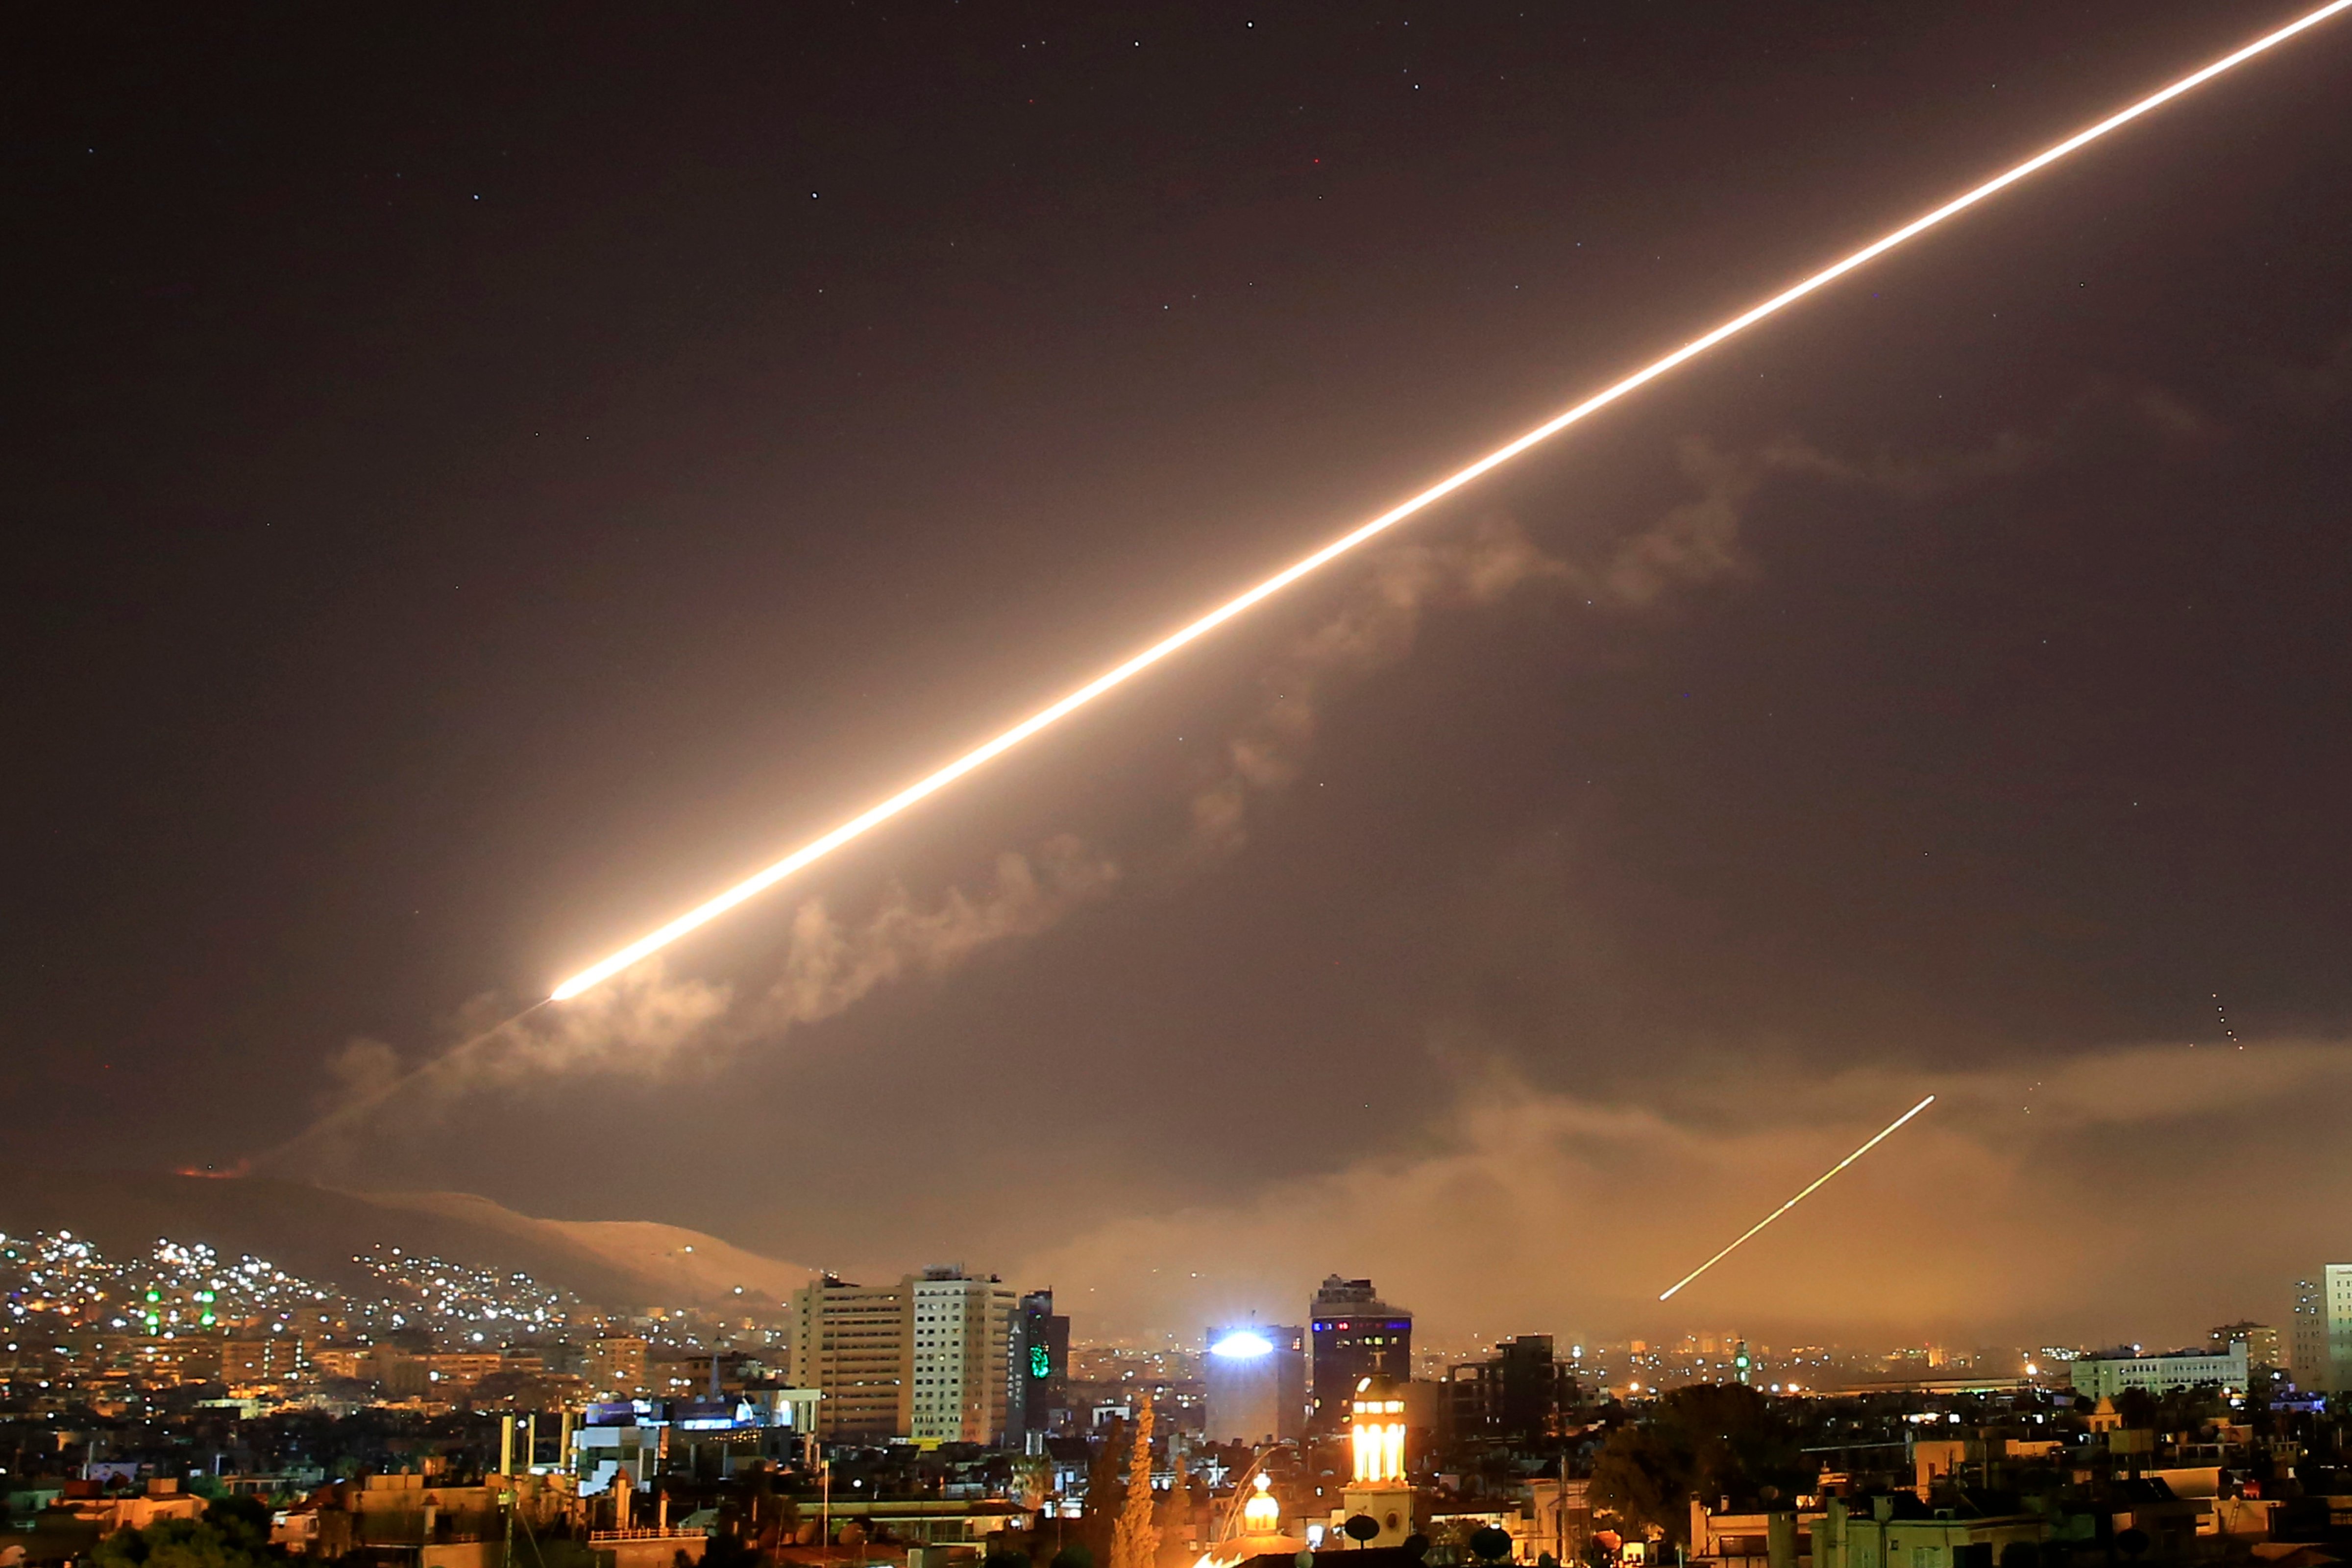 The U.S. attack on Syria targeted different parts of Damascus on April 14, 2018 (Hassan Ammar&mdash;AP)